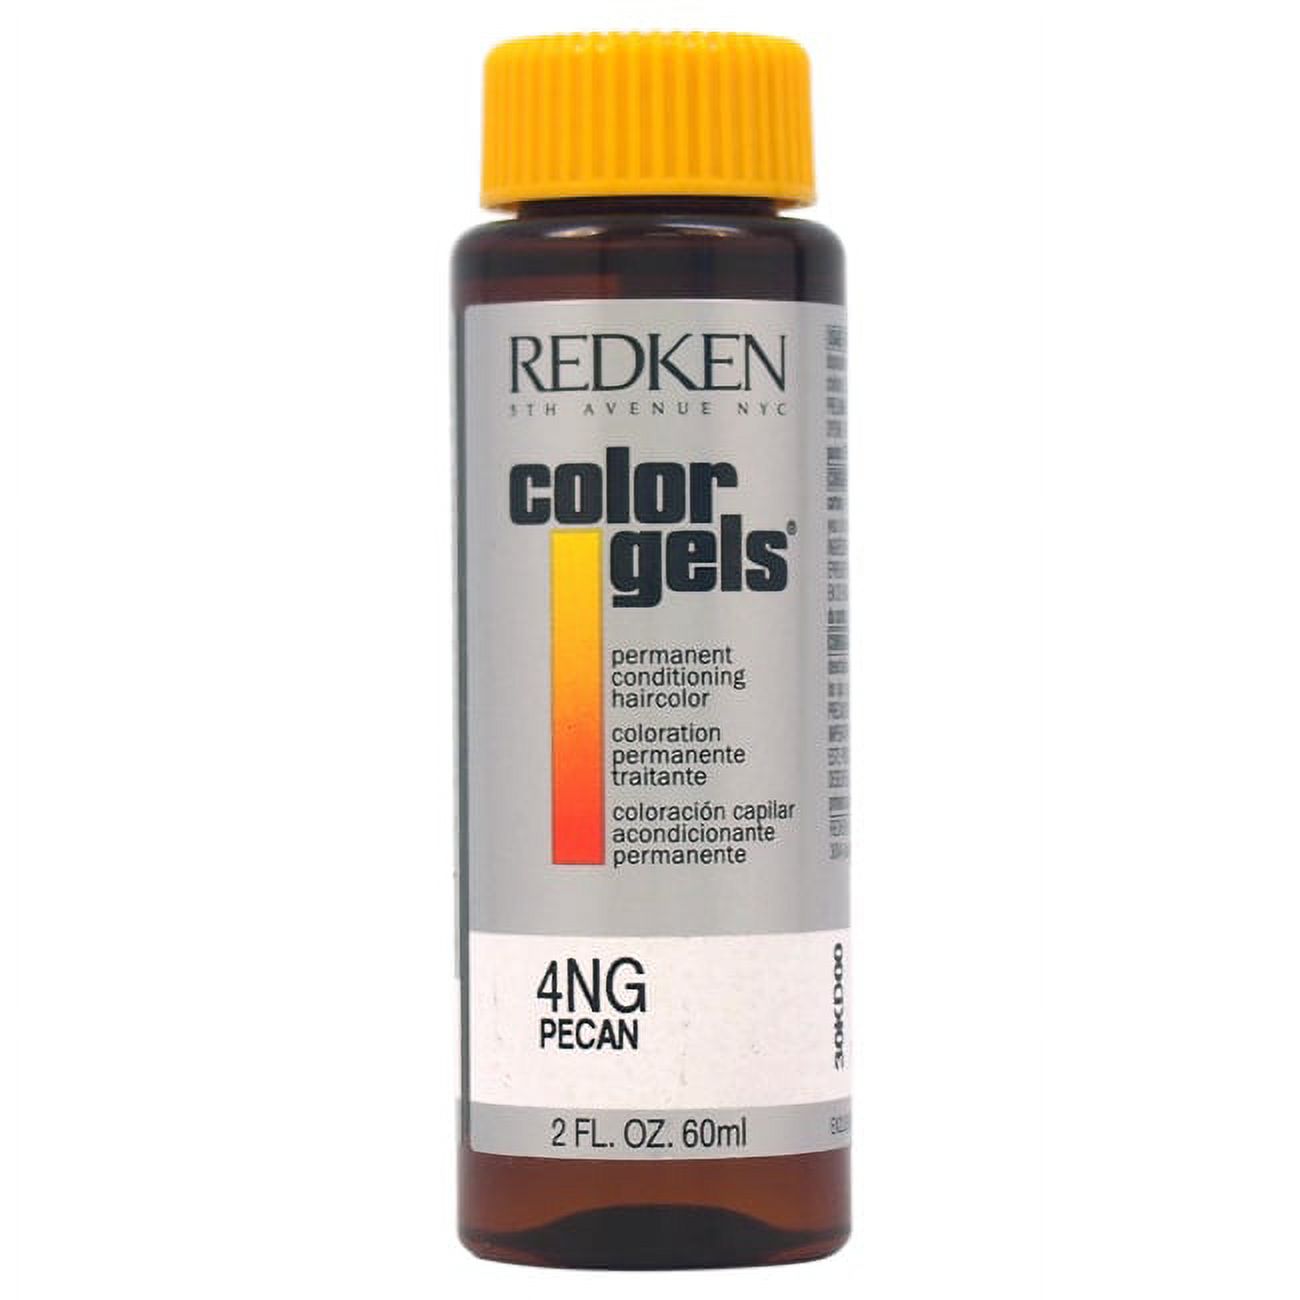 Redken Color Gels Permanent Conditioning Haircolor (Color : 4NG-Pecan) - image 2 of 2